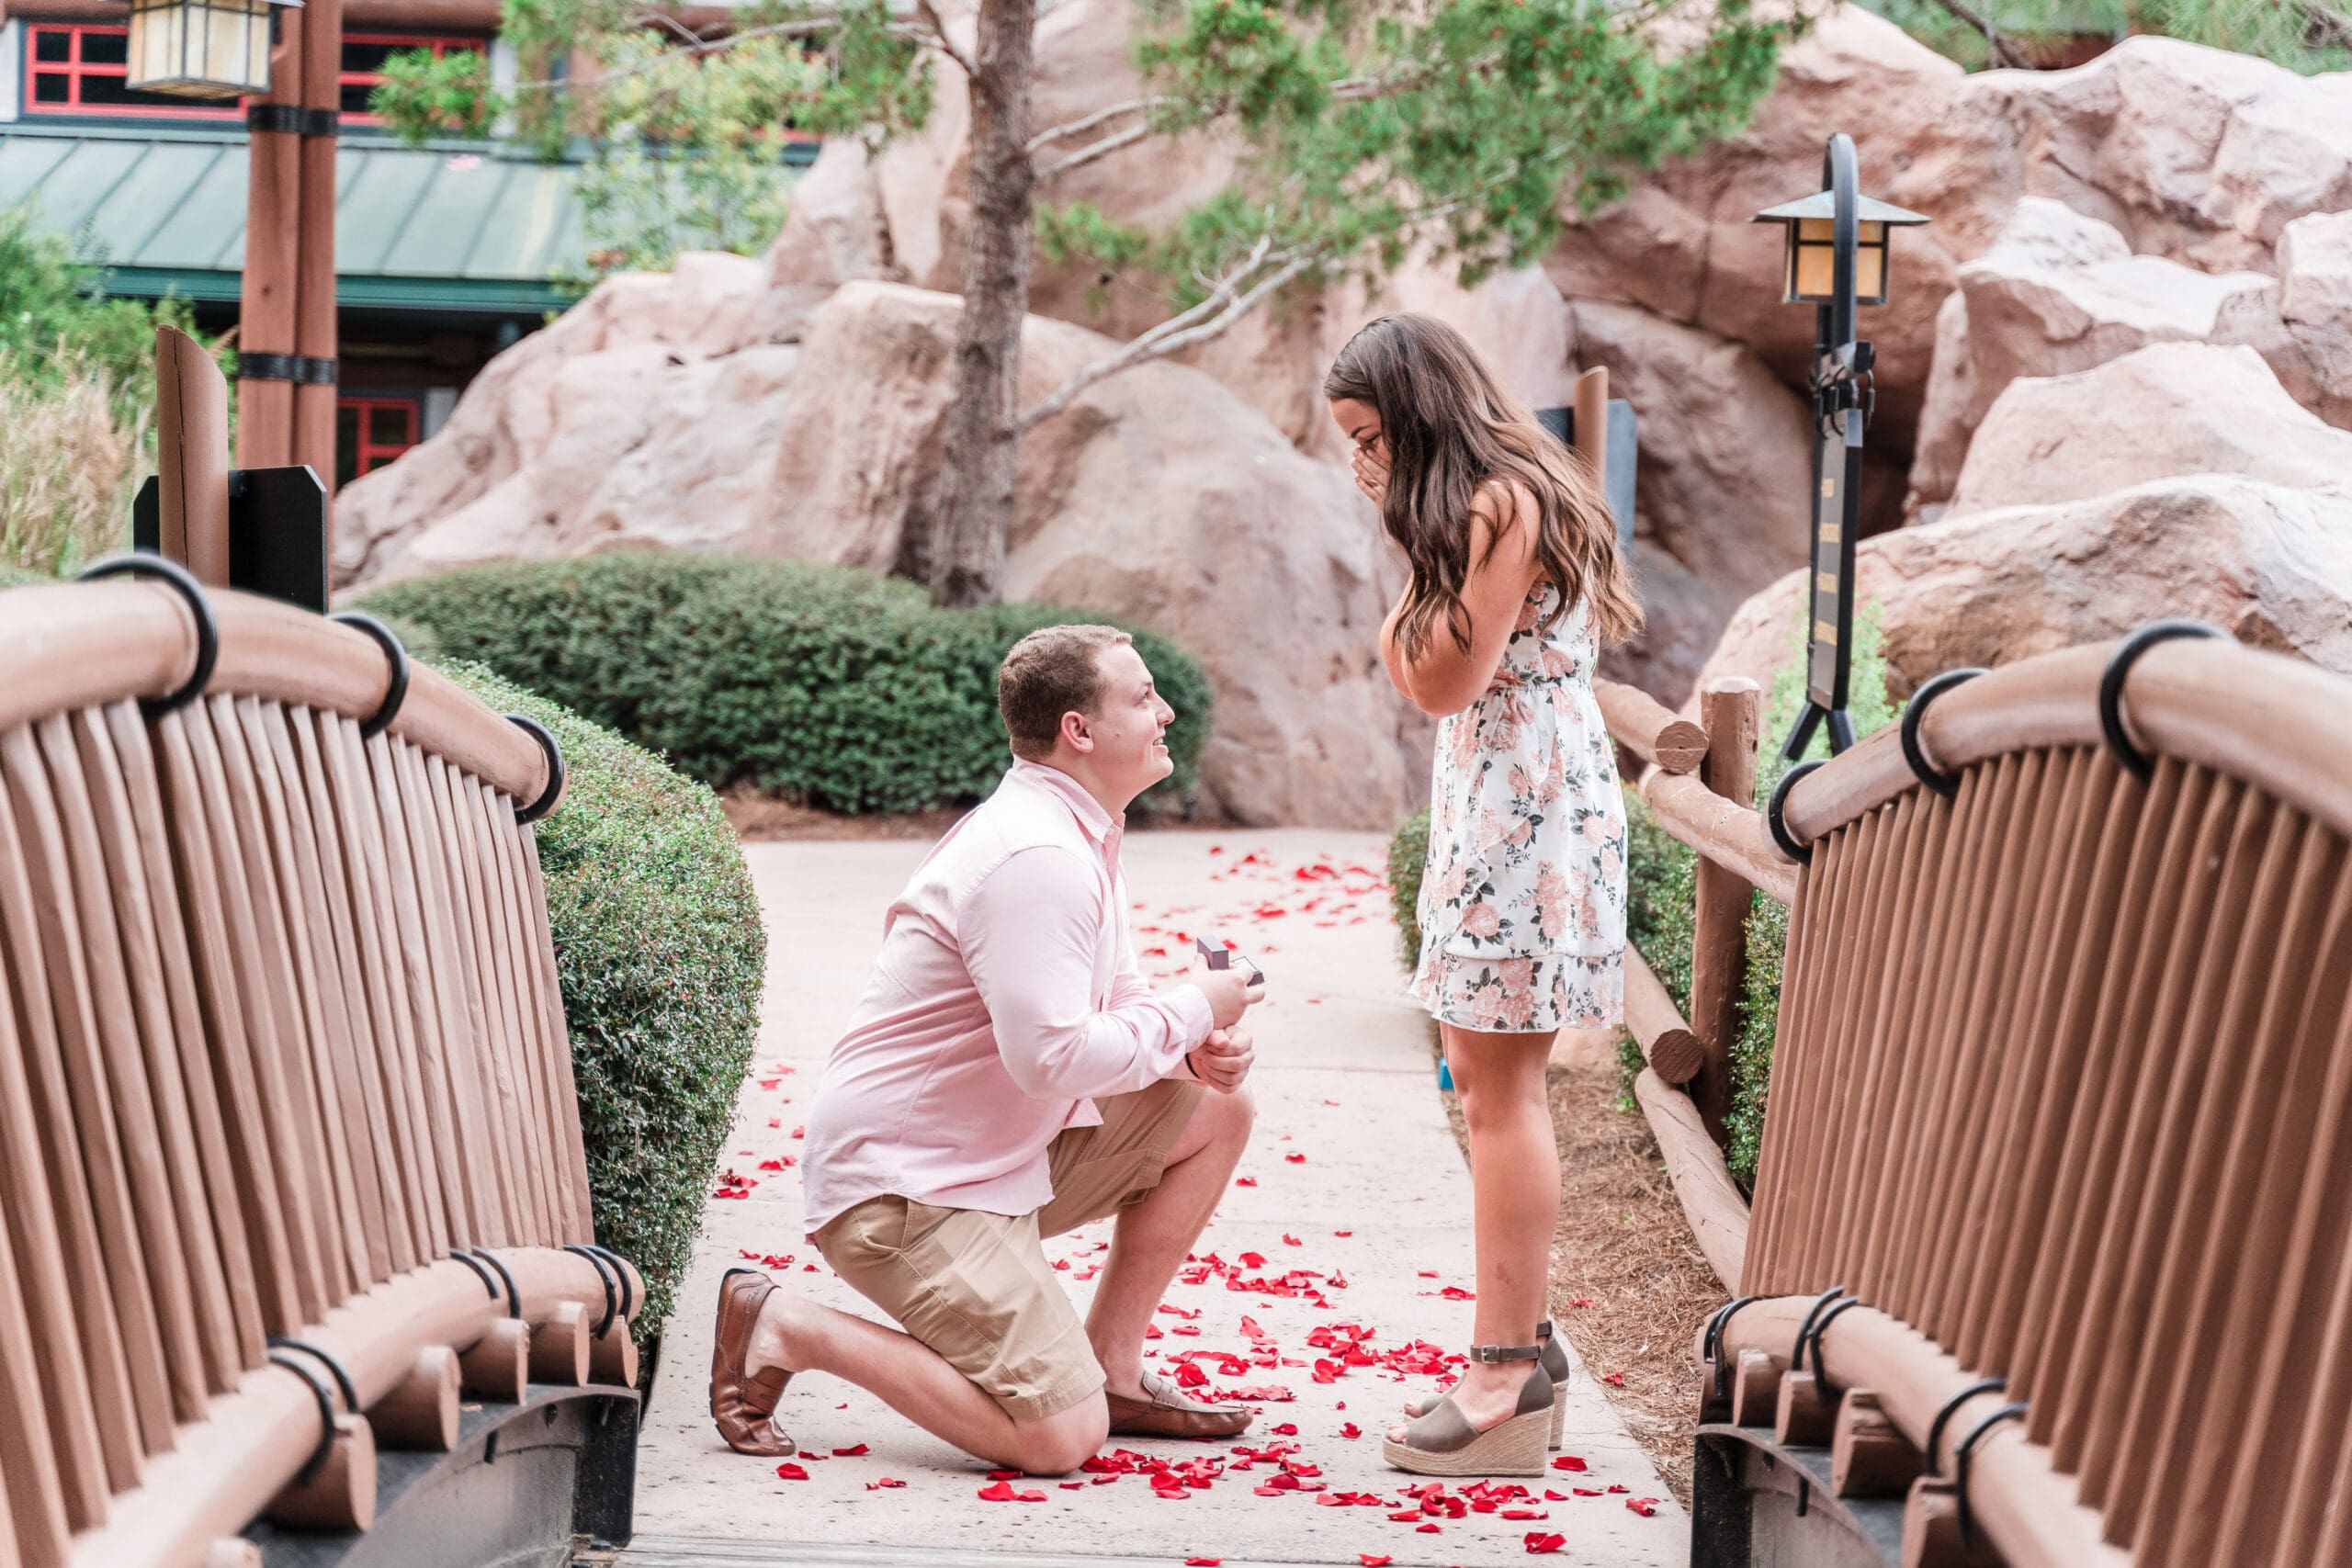 Magical proposal at Disney Wilderness Lodge: Down on one knee as he asks the question, right in front of the bridge adorned with rose petals leading up to the walkway, capturing her gasp of surprise, showcasing the best engagement photo sessions in Orlando Florida with the team at Jerzy Nieves Photography.